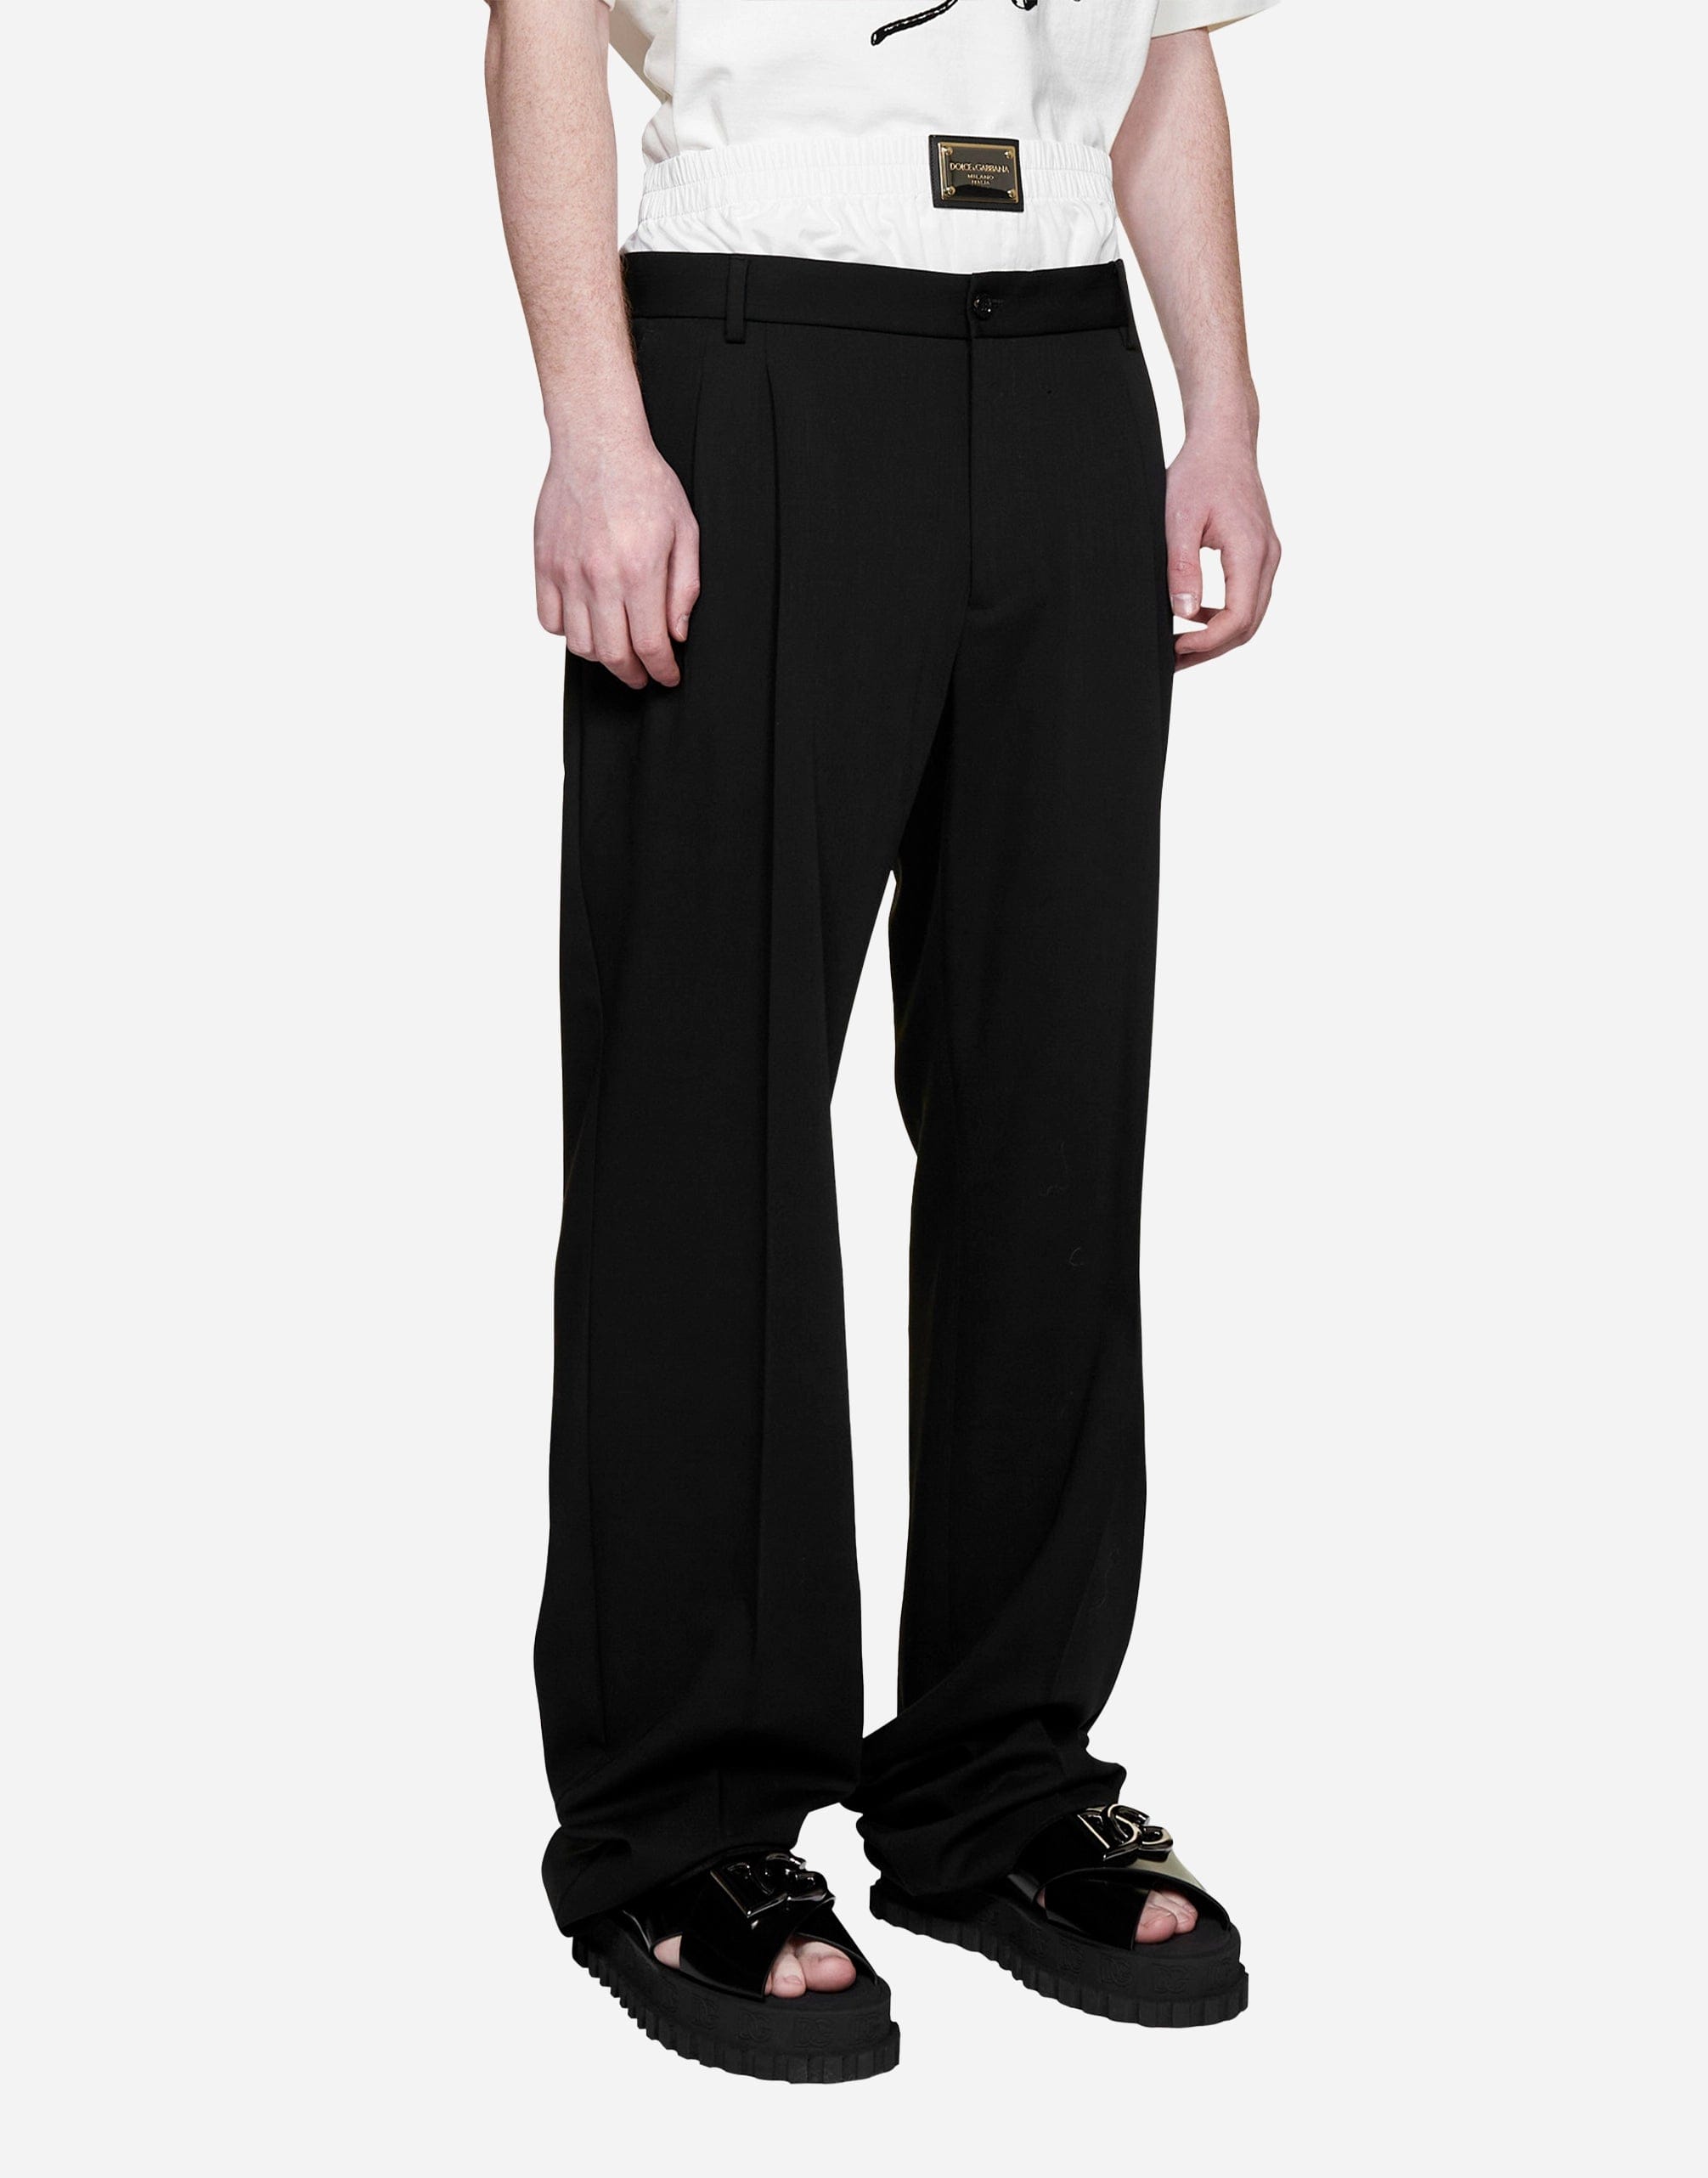 Dolce & Gabbana Red Cargo Men Trousers Cotton Pants • Fashion Brands Outlet